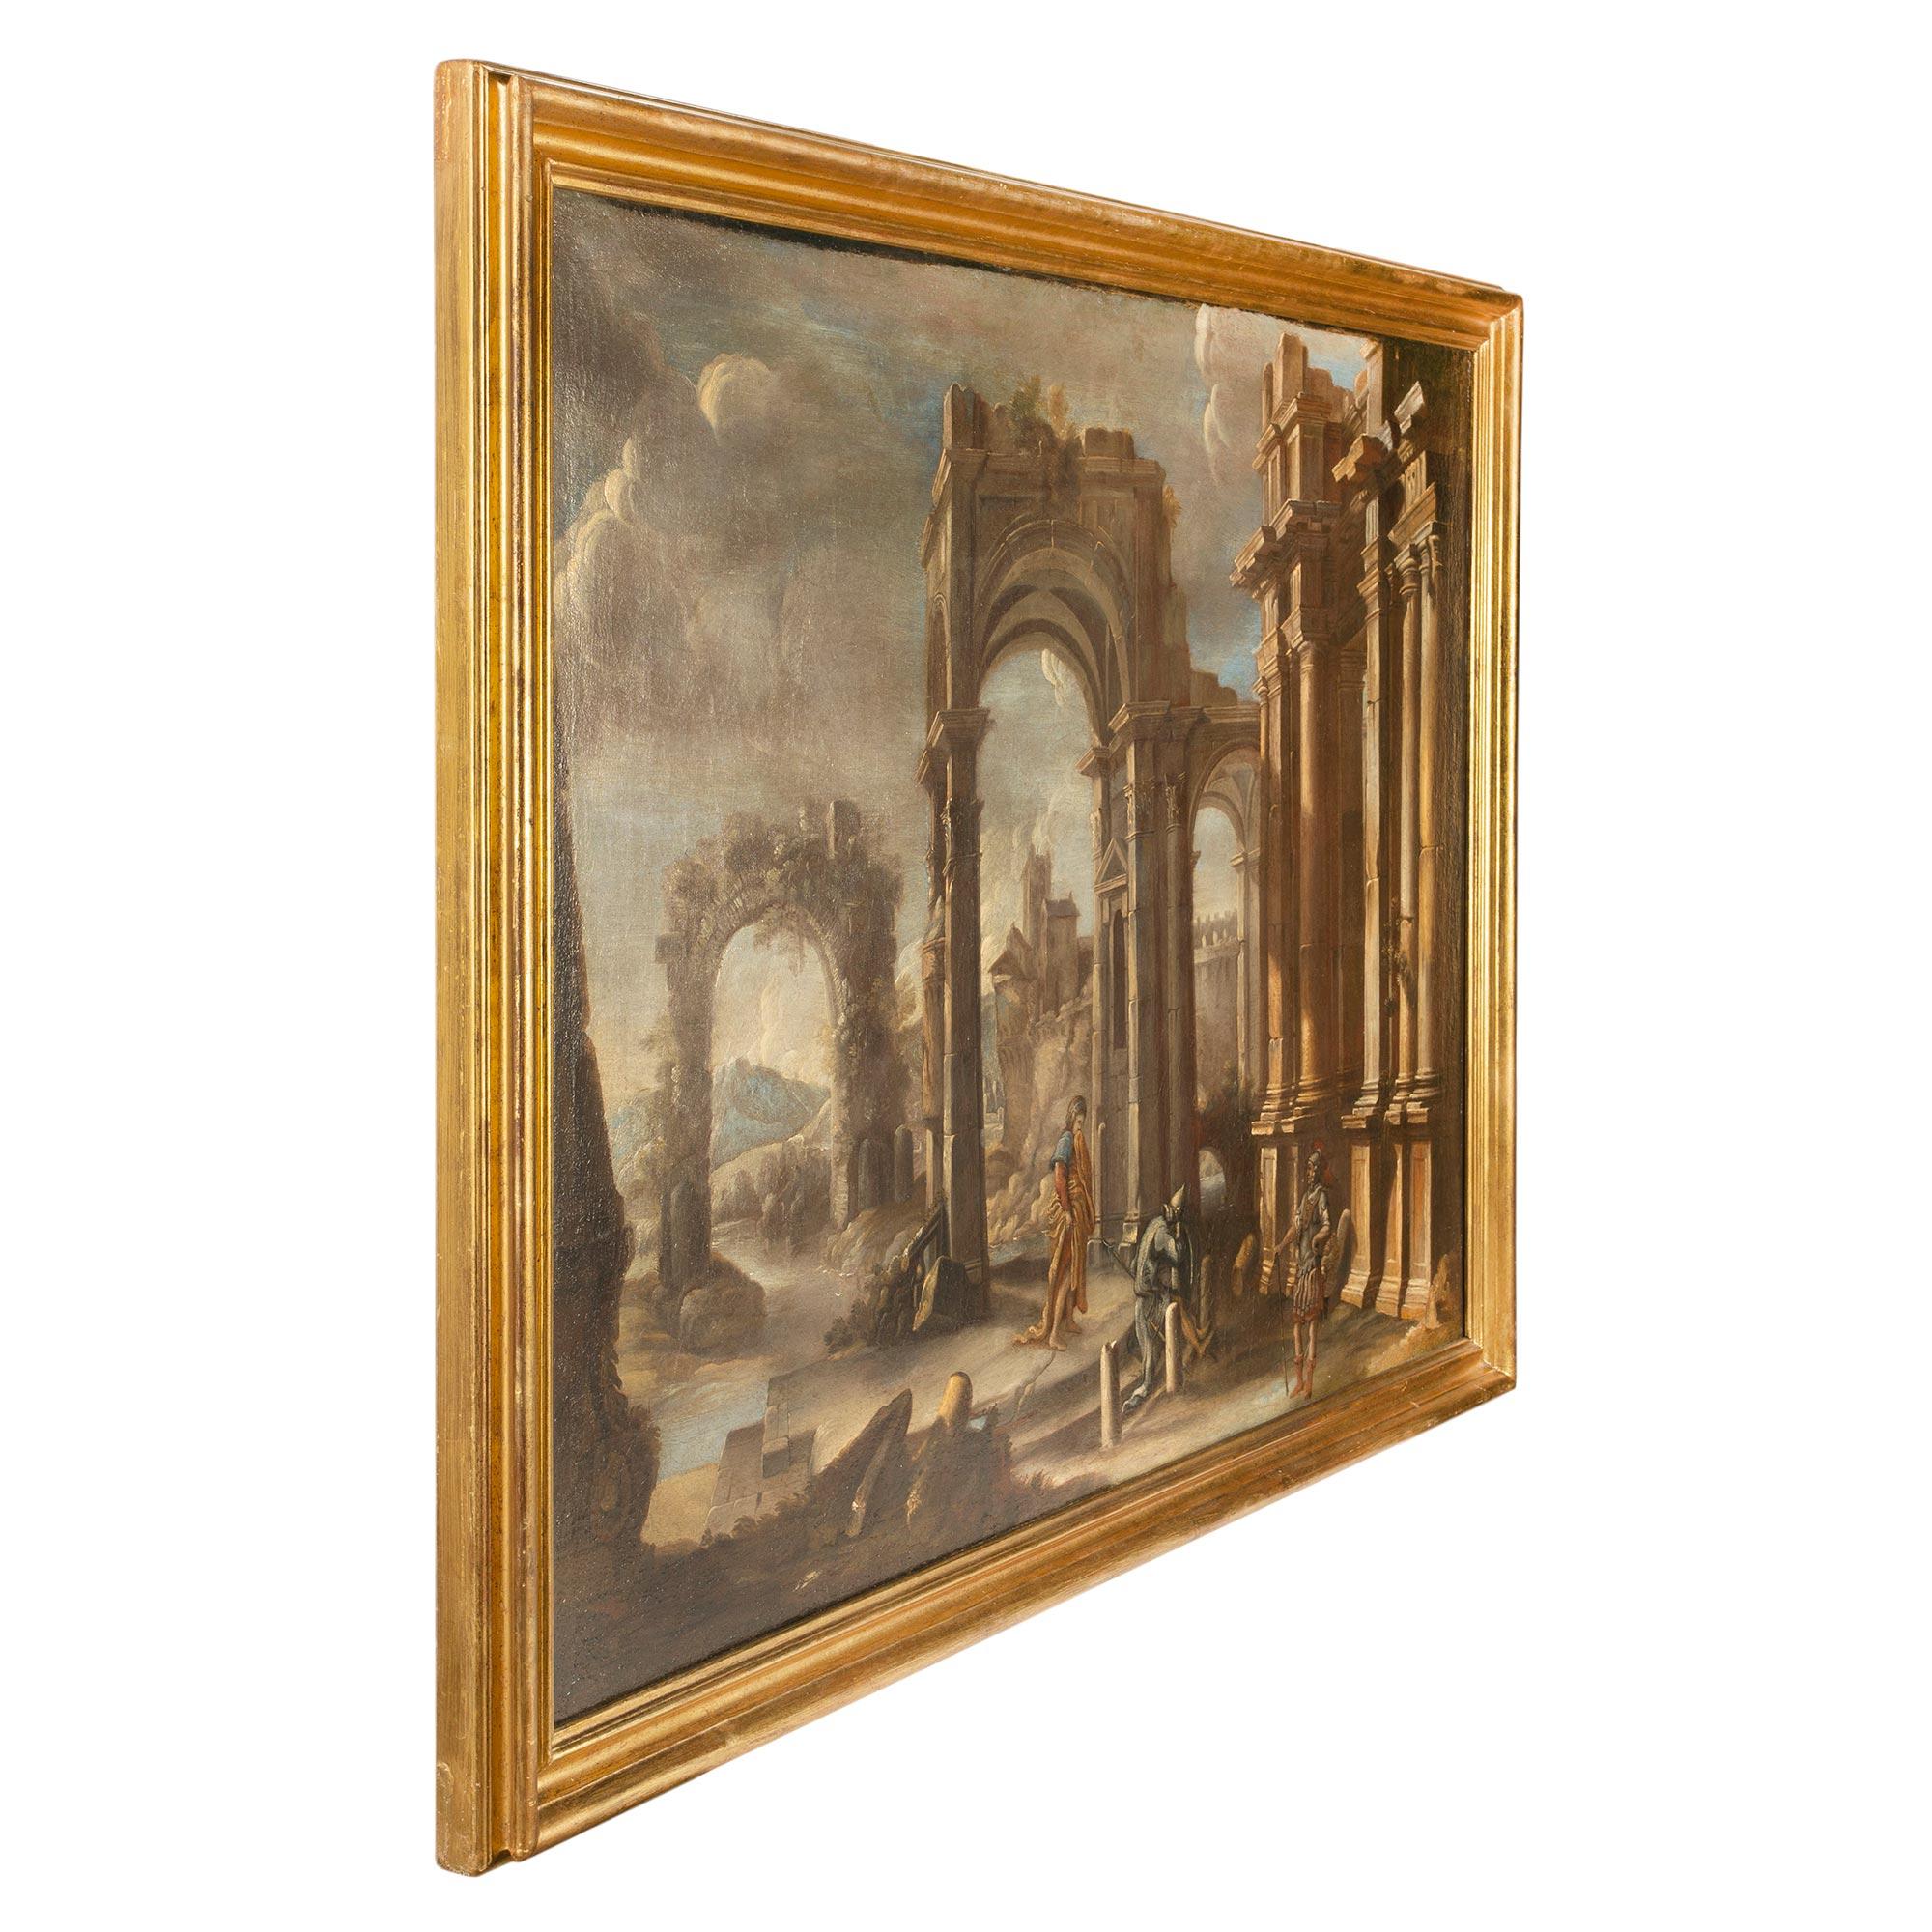 A spectacular and extremely well executed pair of Italian mid 18th century Old Master oil on canvas paintings of ruins. Each painting displays wonderful perspectives, exceptional architectural detail and figures in open settings. The paintings are